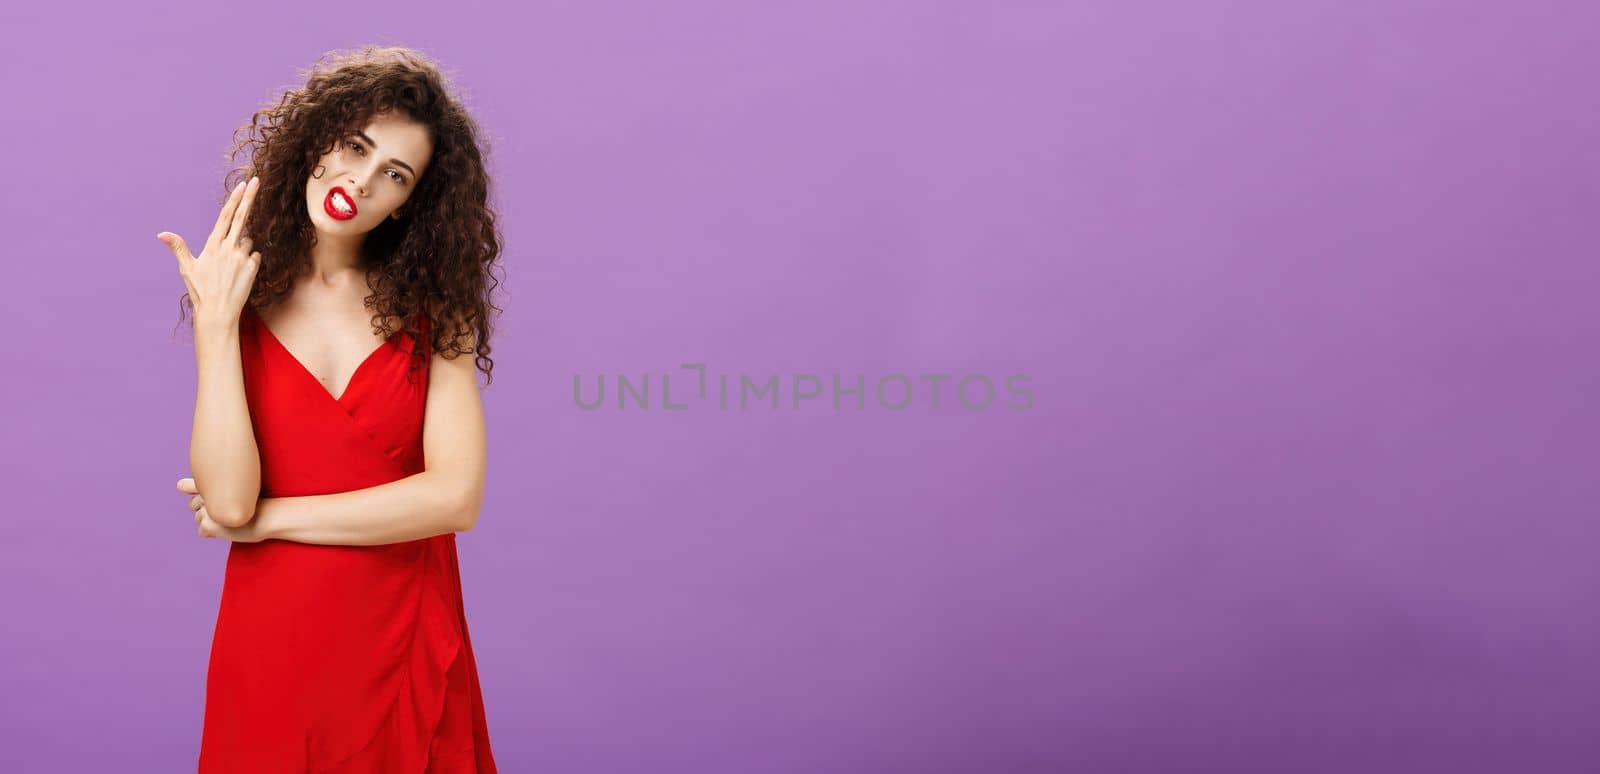 Rules killing me. Rebellious hot and stylish european woman in elegant red dress with curly hairstyle tilting head showing finger gun gesture as if blowing brains from boredom over purple background. Emotions concept